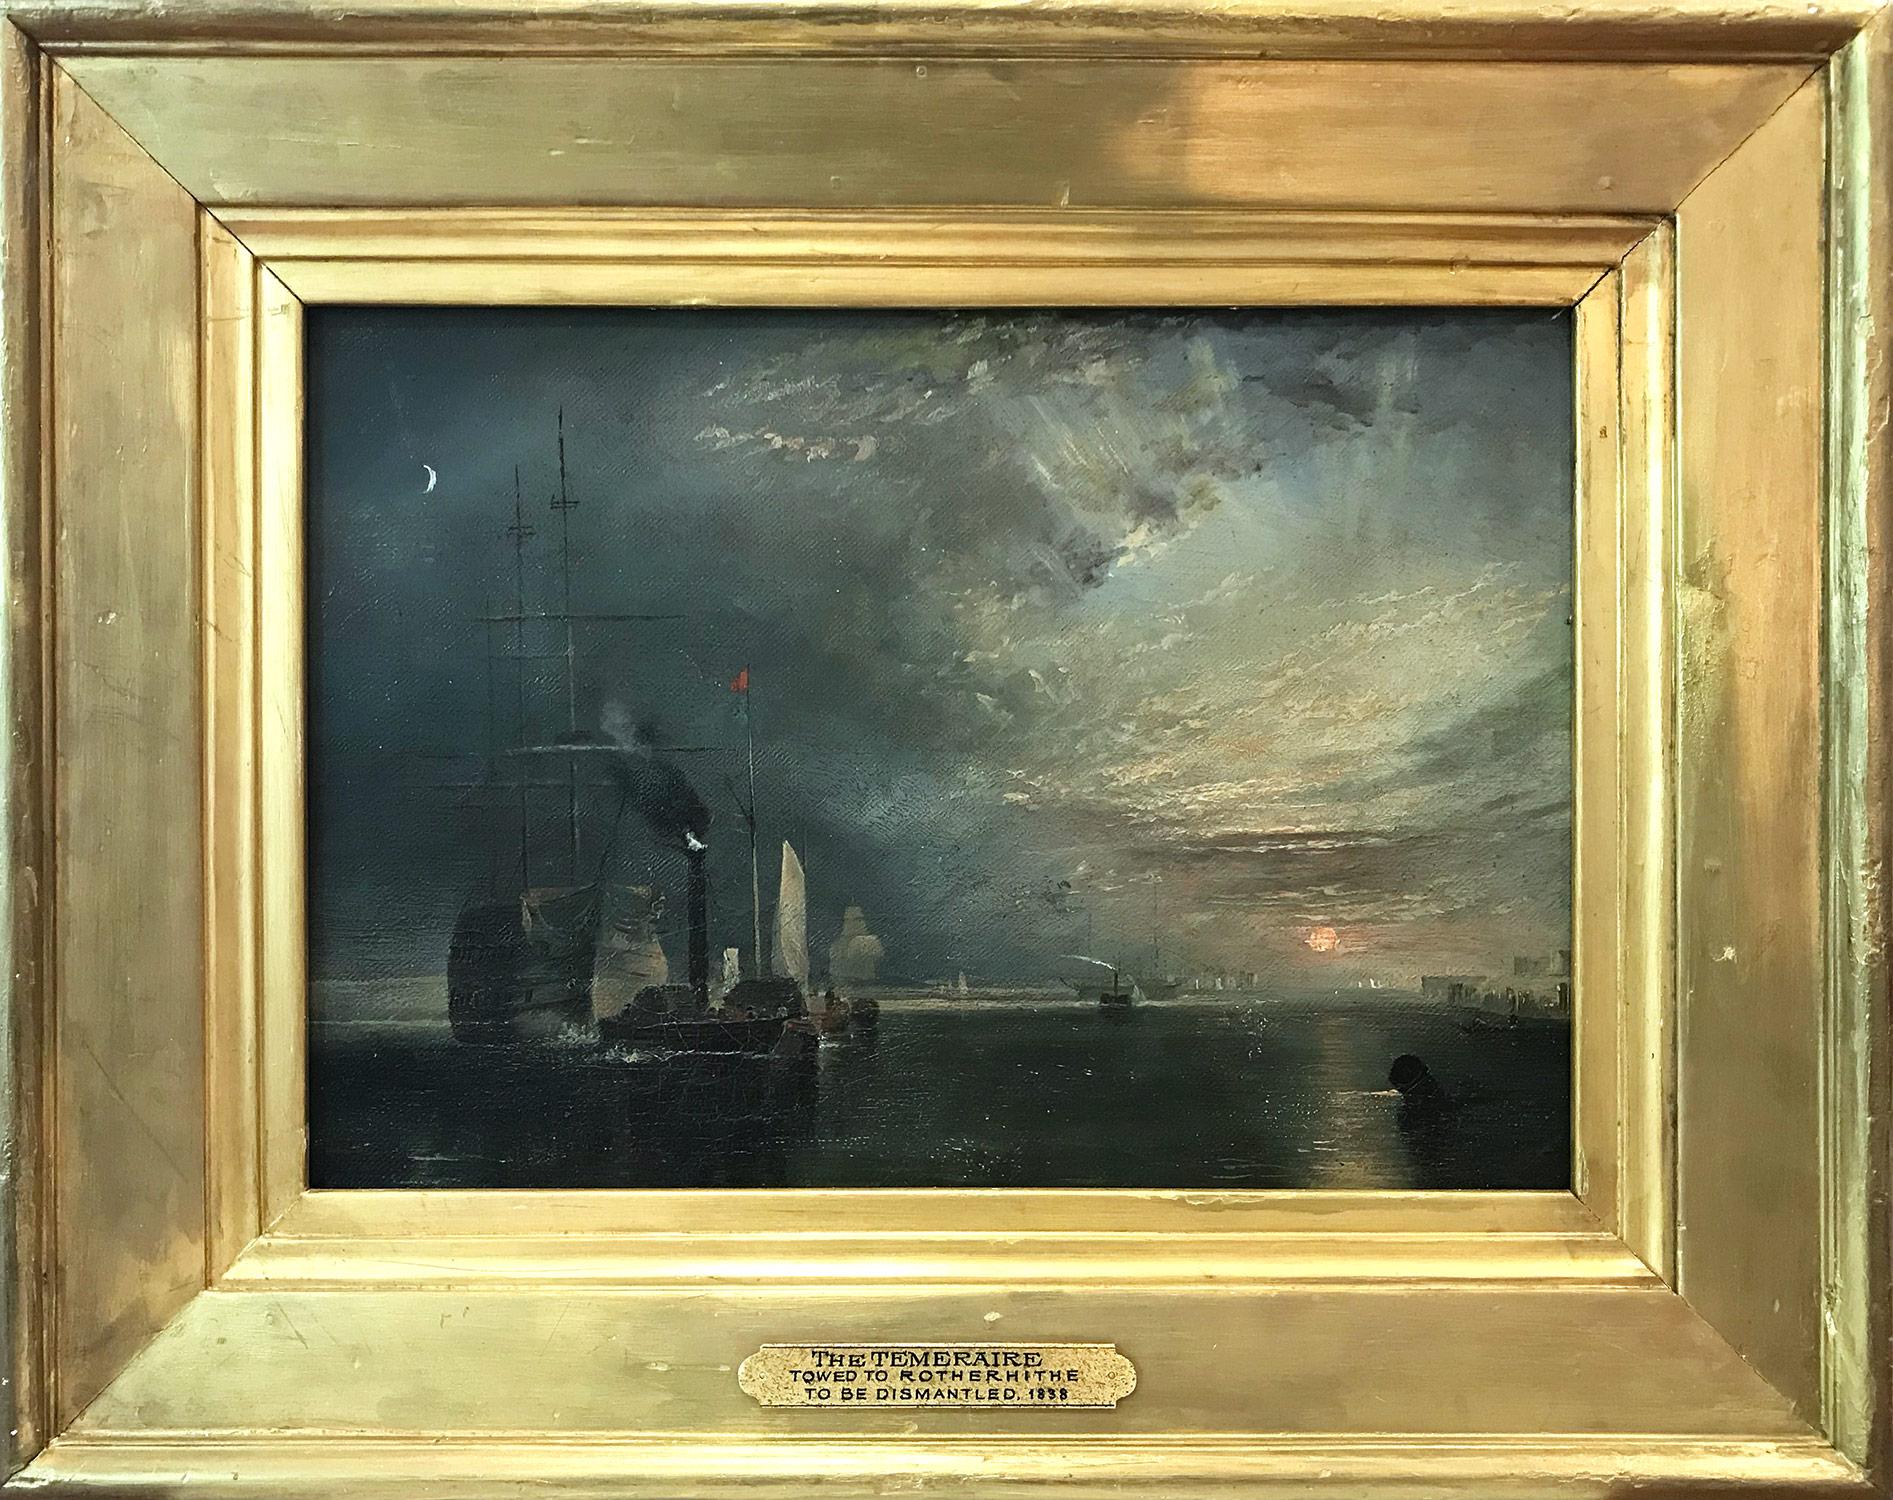 (After) Joseph Mallord William Turner Landscape Painting - "The Temeraire" In a Manner of J. M. W Turner 19th Century American Oil Painting